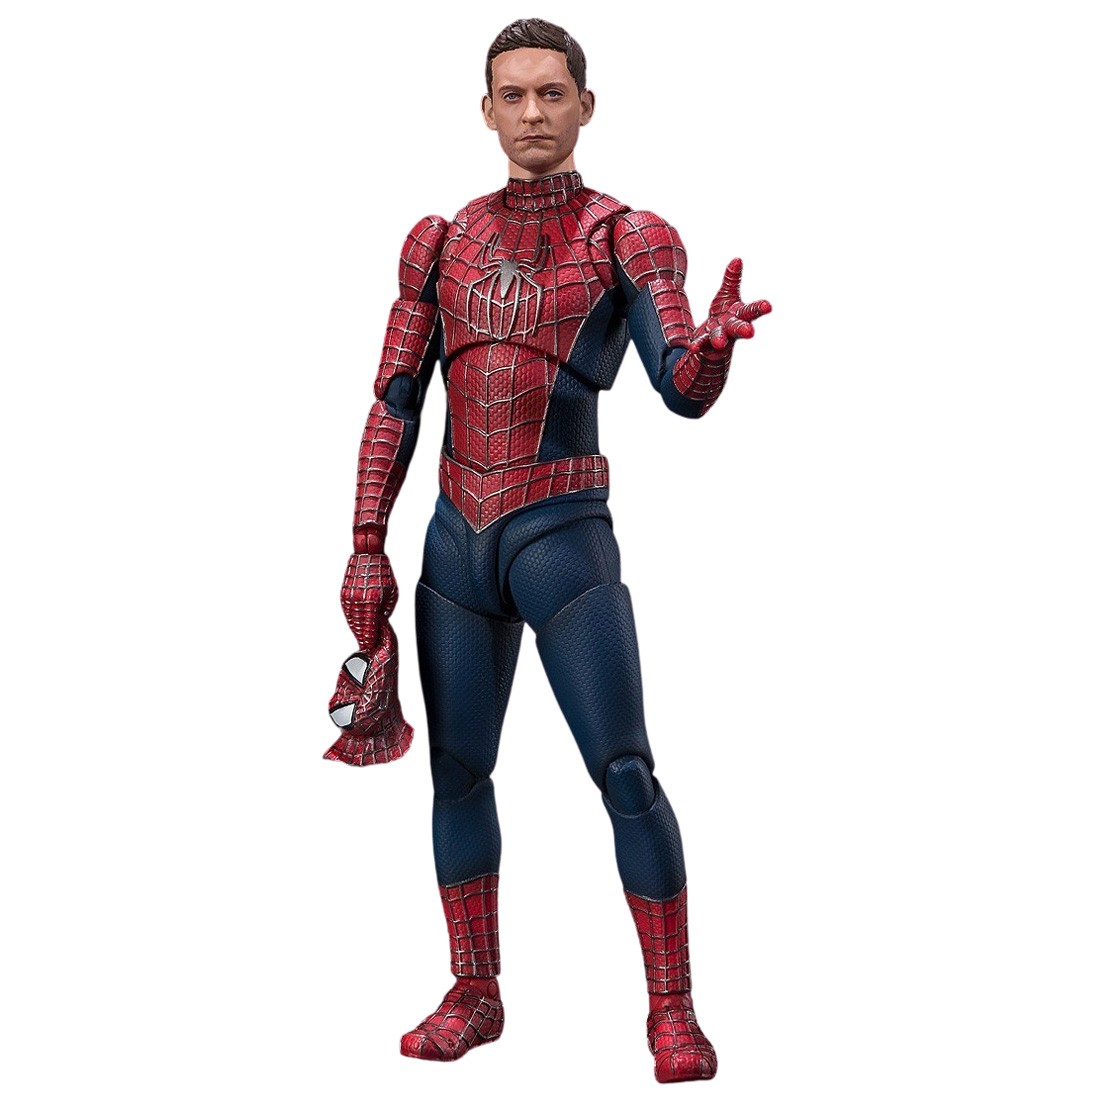 Bandai S.H.Figuarts Spider-Man No Way Home The Friendly Neighborhood Spider-Man Figure (red)